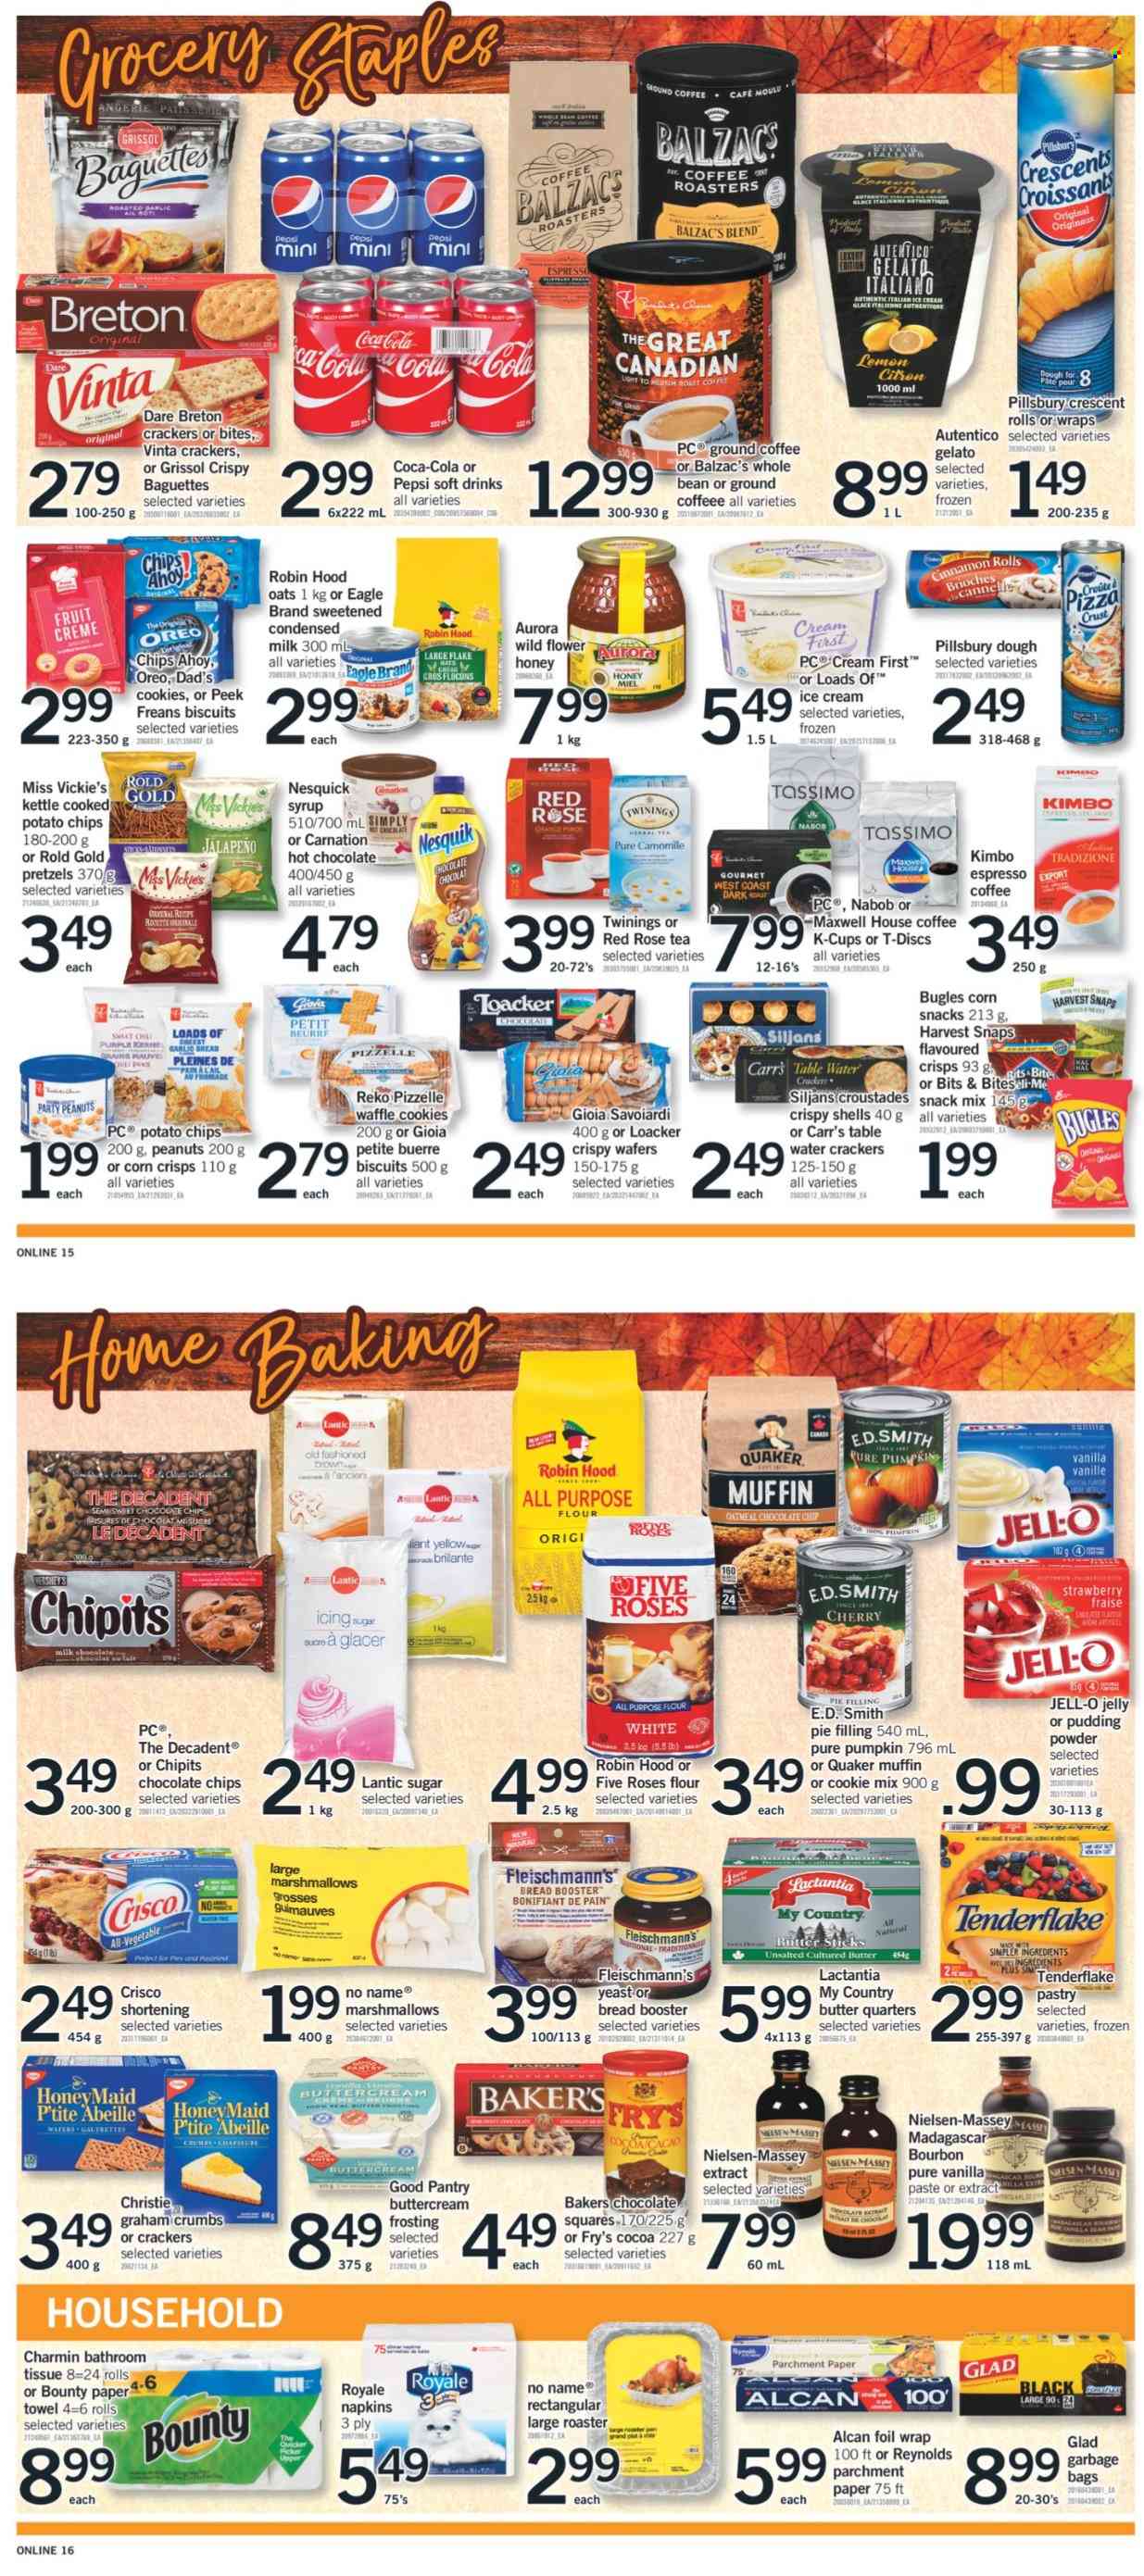 thumbnail - Fortinos Flyer - October 07, 2021 - October 10, 2021 - Sales products - pretzels, croissant, wraps, cinnamon roll, crescent rolls, jalapeño, cherries, No Name, pizza, Pillsbury, Quaker, pudding, milk, condensed milk, yeast, butter, gelato, marshmallows, wafers, snack, Bounty, jelly, crackers, biscuit, potato chips, all purpose flour, cocoa, Crisco, flour, frosting, shortening, sugar, pie filling, oatmeal, oats, Jell-O, icing sugar, Harvest Snaps, honey, syrup, peanuts, Coca-Cola, Pepsi, soft drink, hot chocolate, Maxwell House, tea, Twinings, coffee, ground coffee, coffee capsules, K-Cups, wine, rosé wine, bourbon, napkins, bath tissue, paper towels, Charmin, pen, Bakers, roaster, table, Oreo, baguette. Page 9.